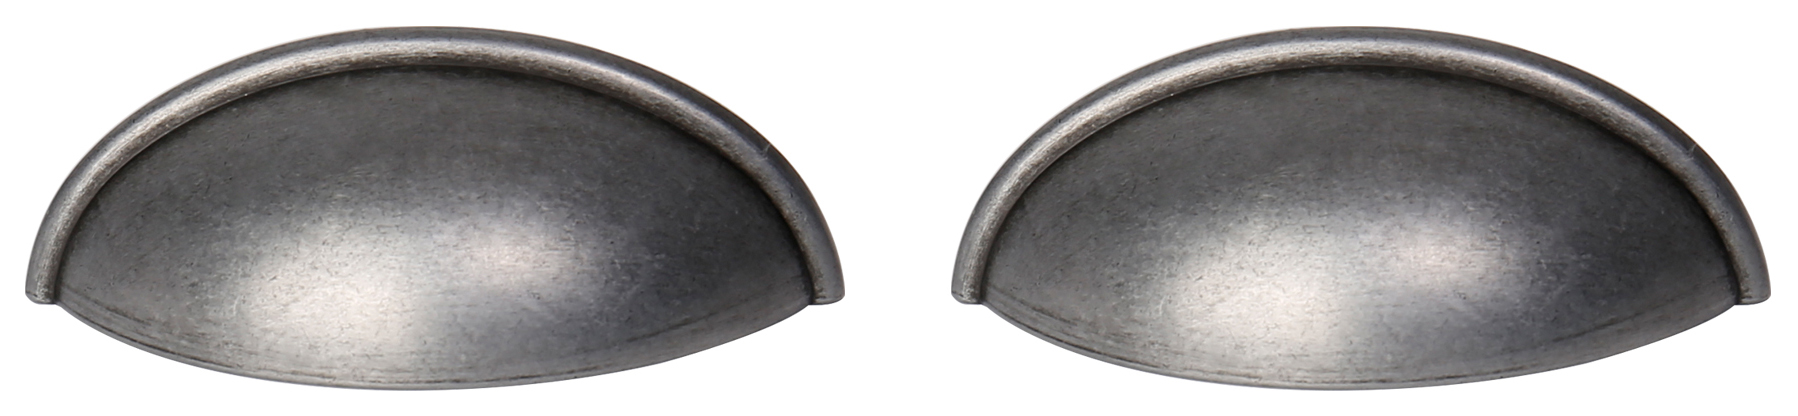 Image of Cup Cabinet Handle Cast Iron 80mm - Pack of 2